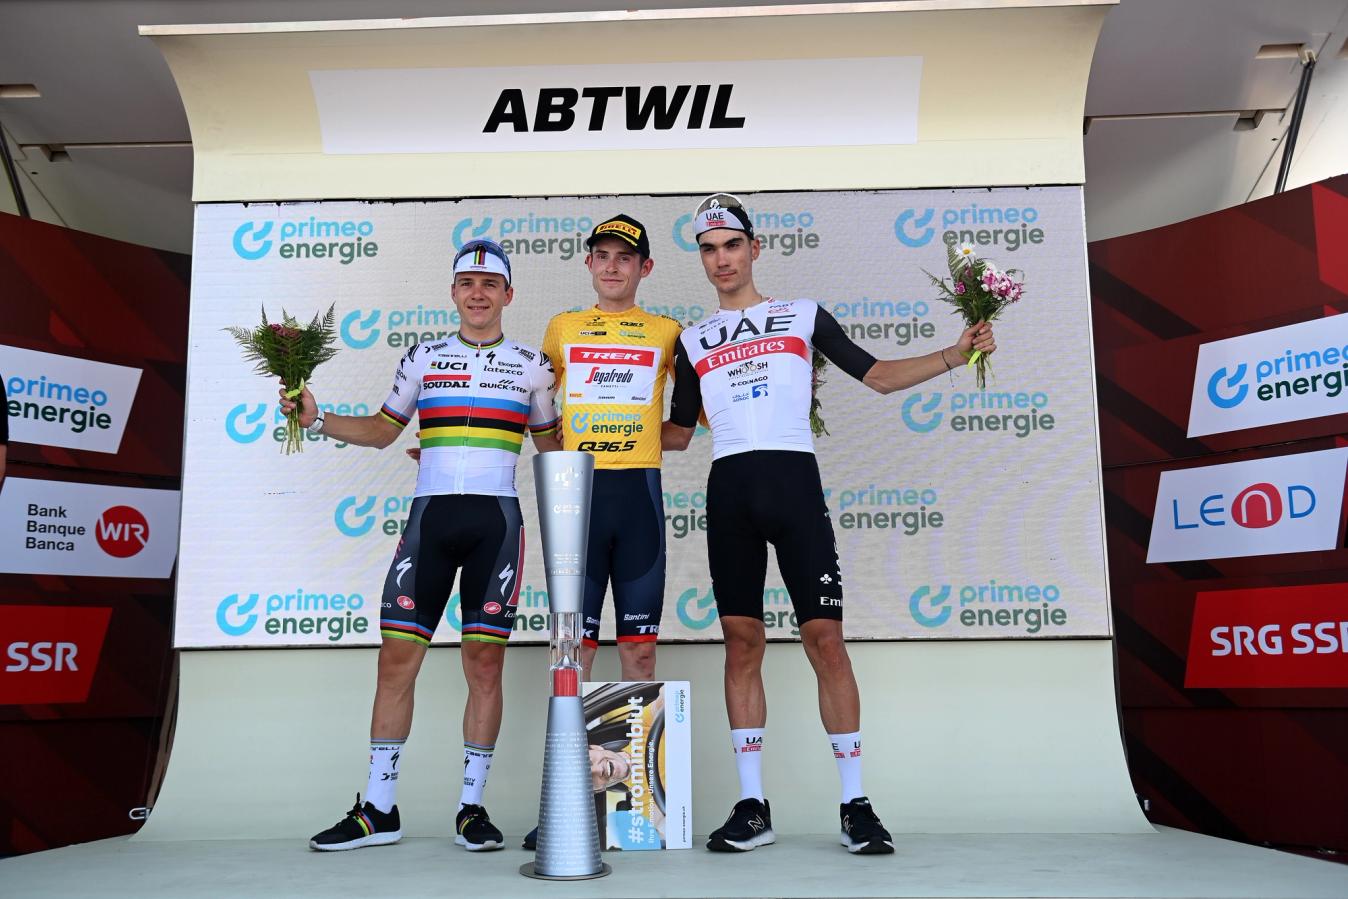 Mattias Skjelmose beat out the likes of Remco Evenepoel (left) and Juan Ayuso (right) at the Tour de Suisse, highlighting the level he could achieve in stage races